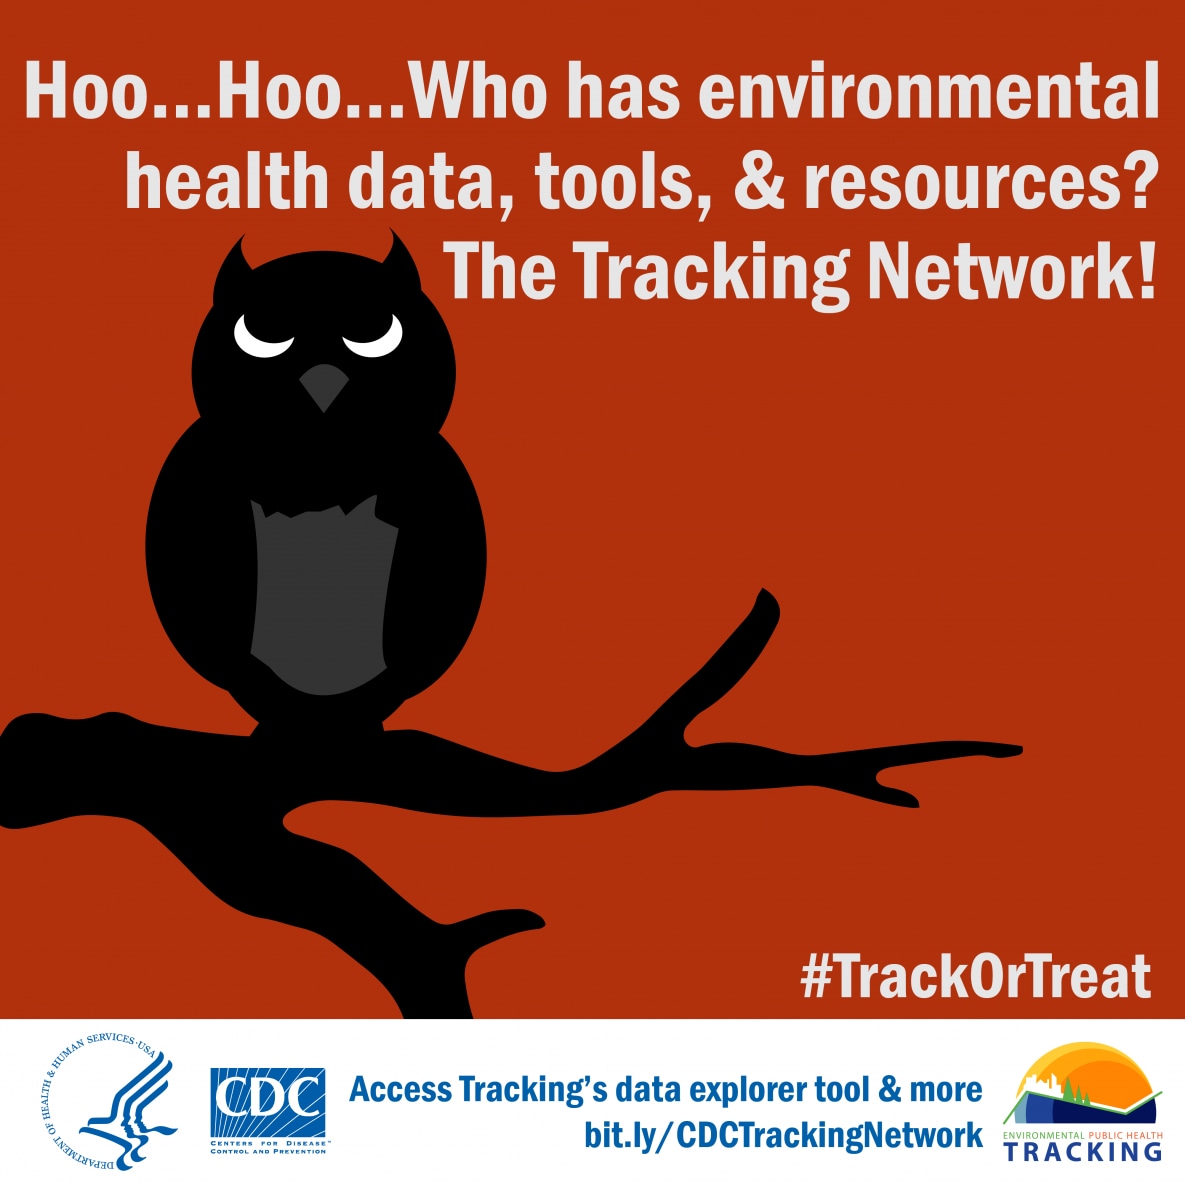 Owl graphic with text: "Hoo…Hoo…Who has environmental health data, tools, & resources? The Tracking Network!"